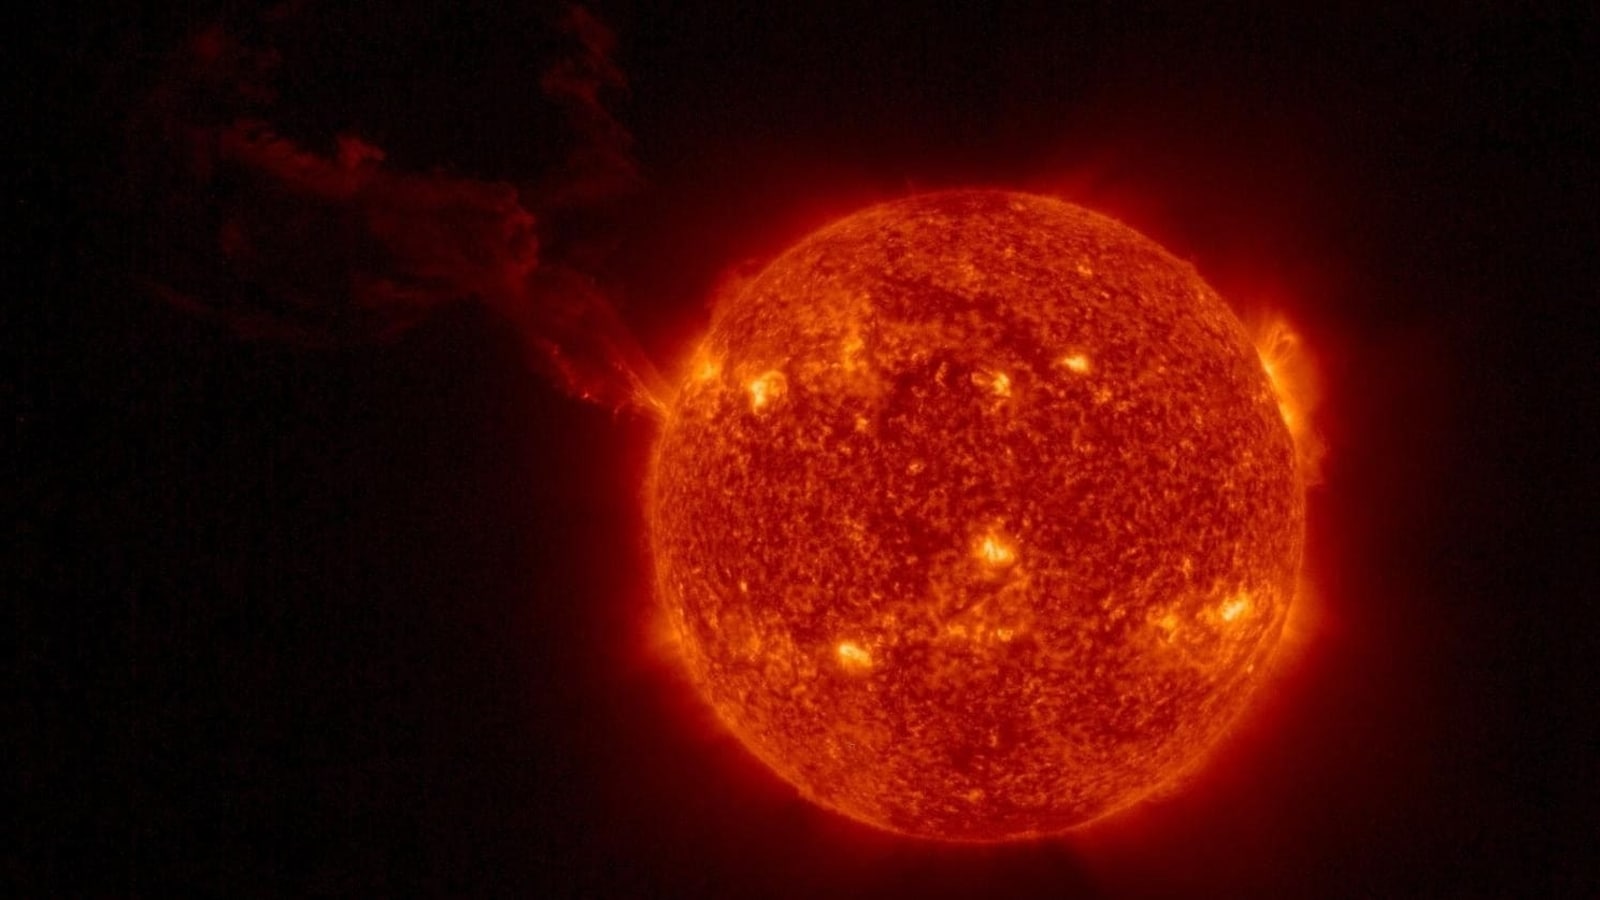 Sun sparks solar storm, causes radio blackouts on Earth; NASA SDO reveals reason and affected regions